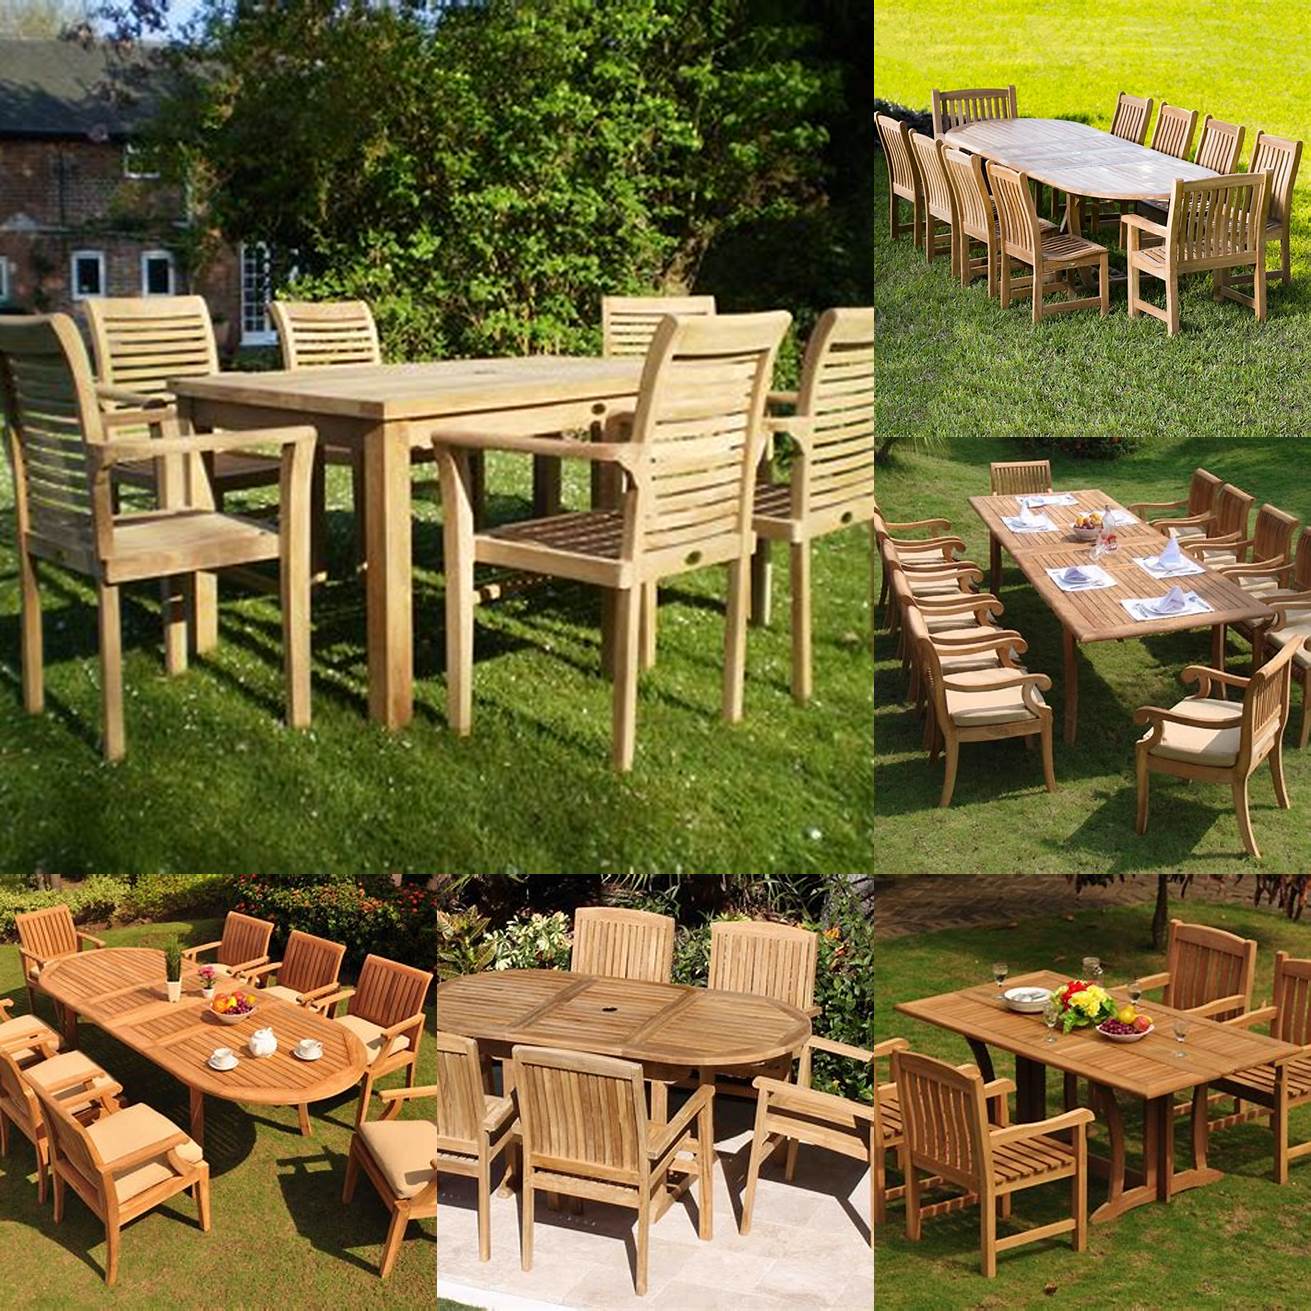 A picture of teak outdoor furniture